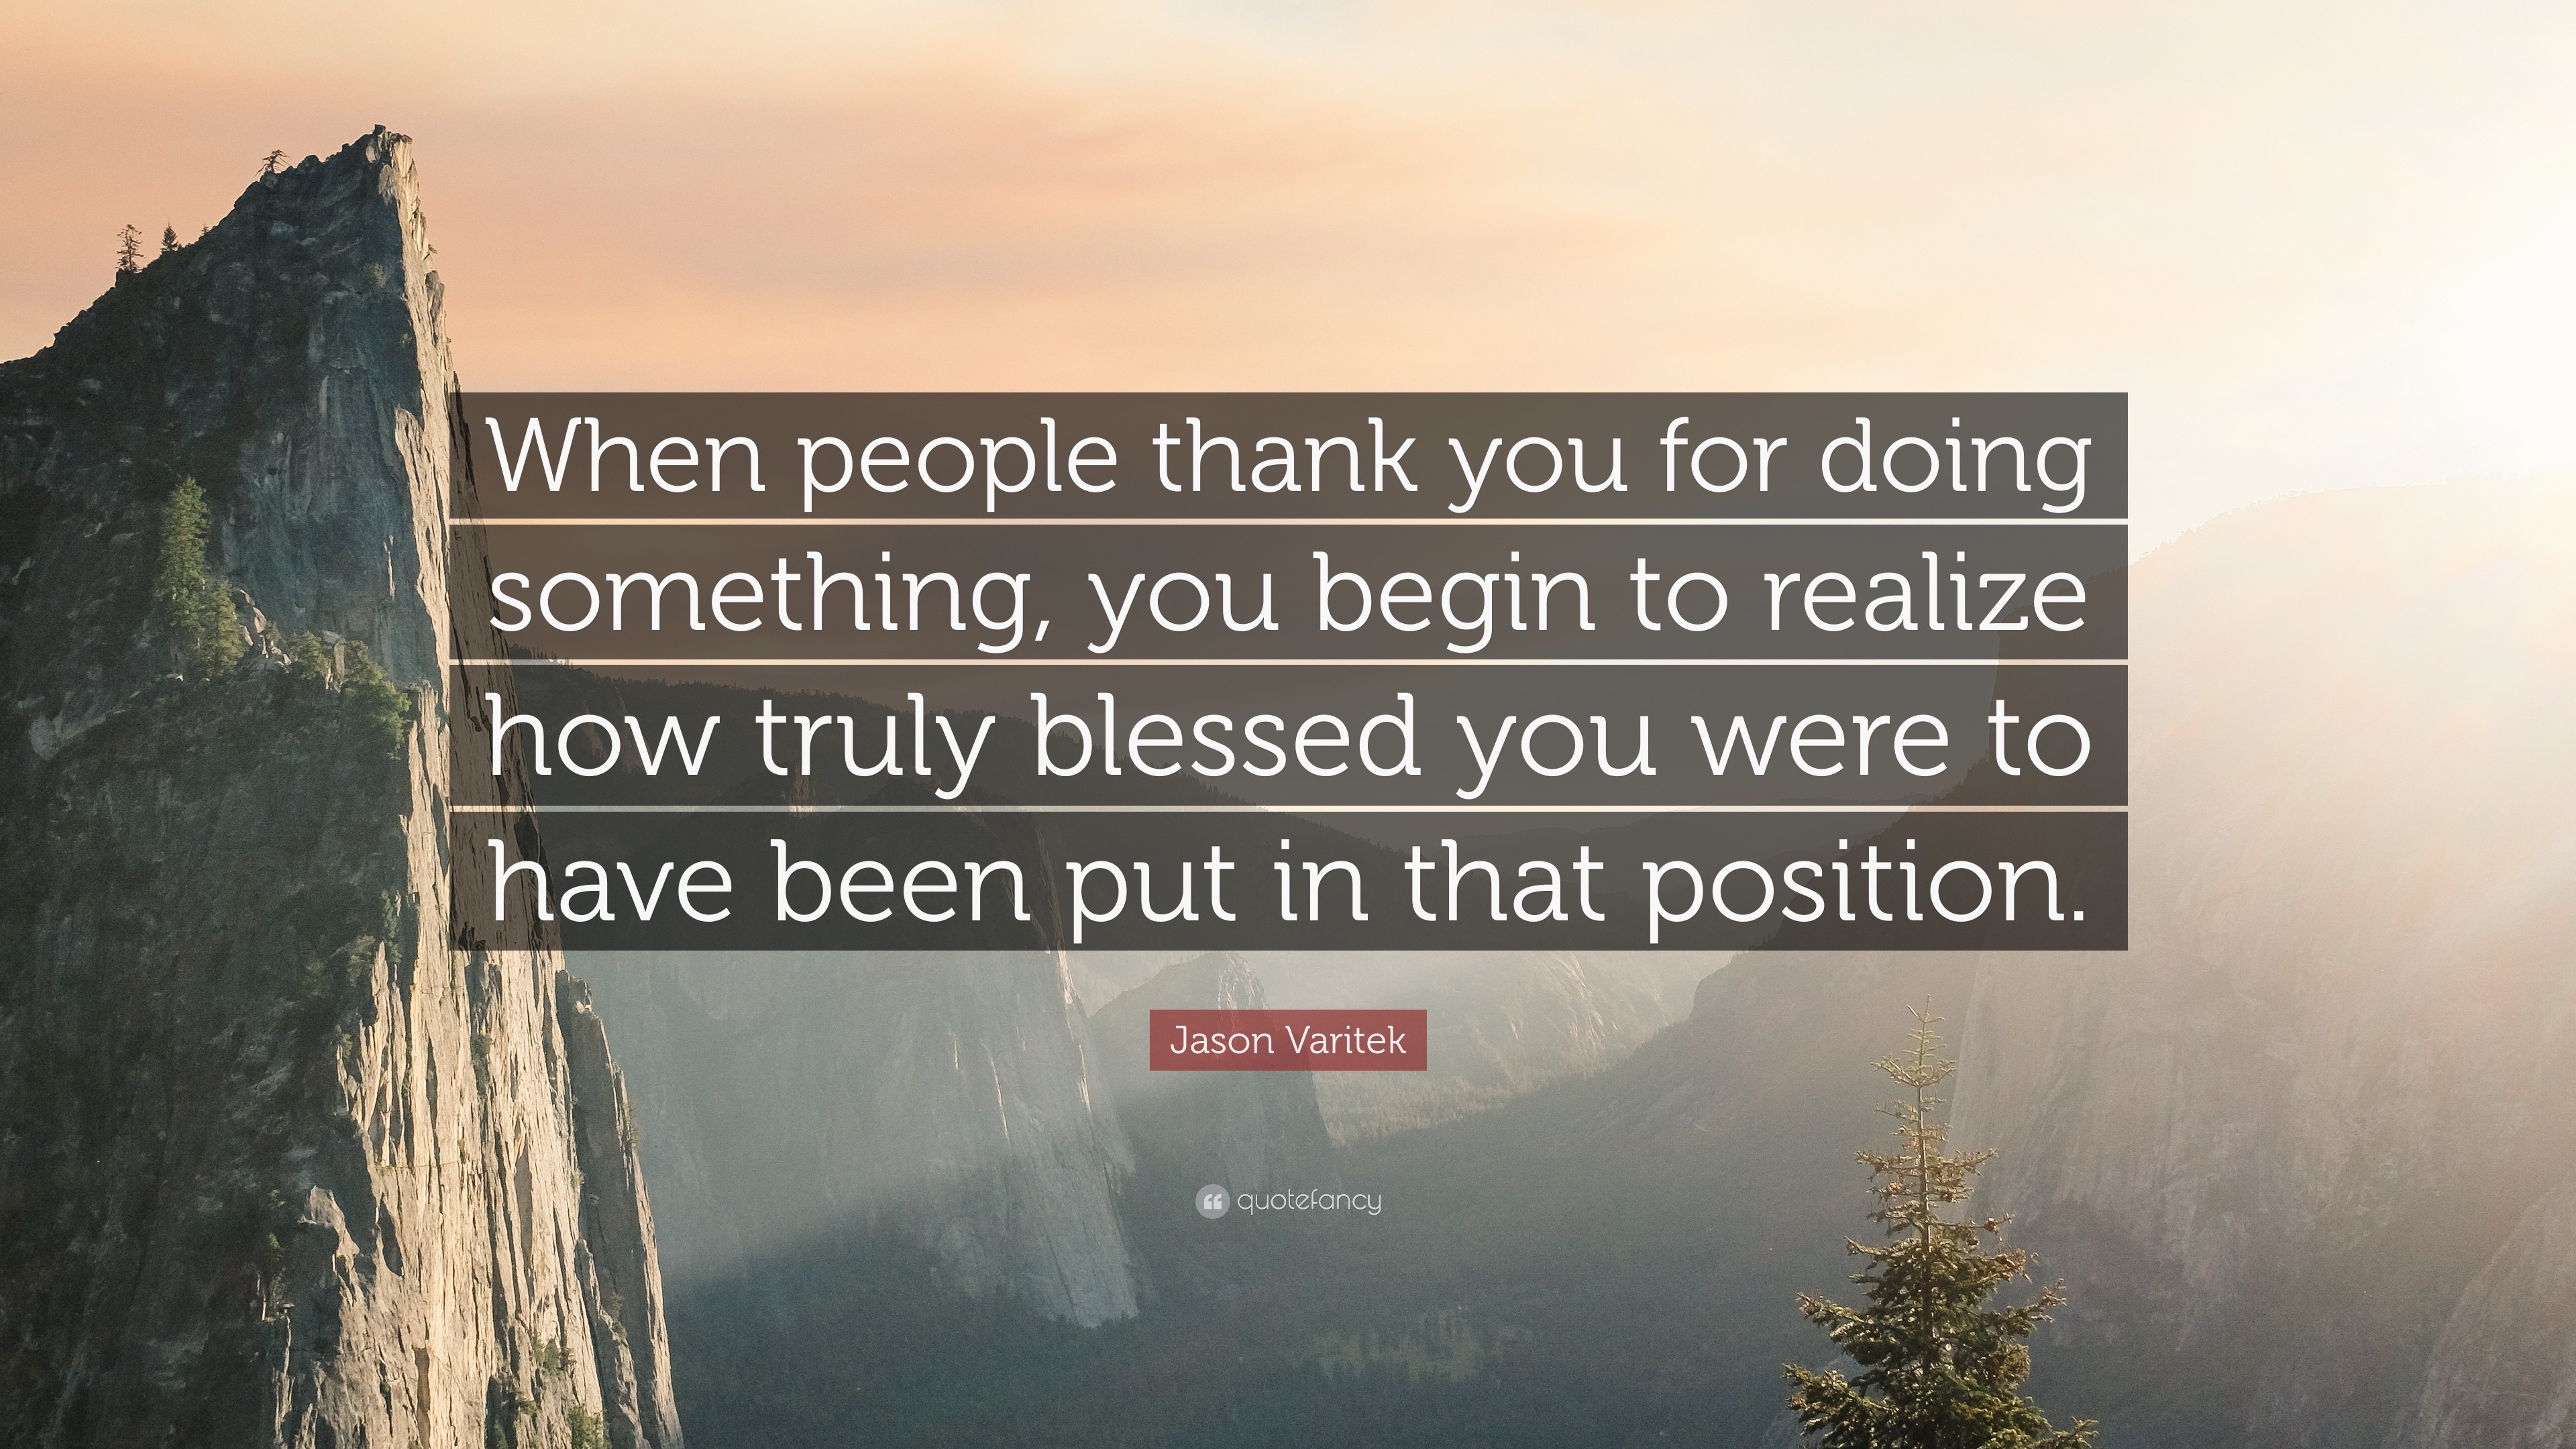 Jason Varitek Quote: “When people thank you for doing something